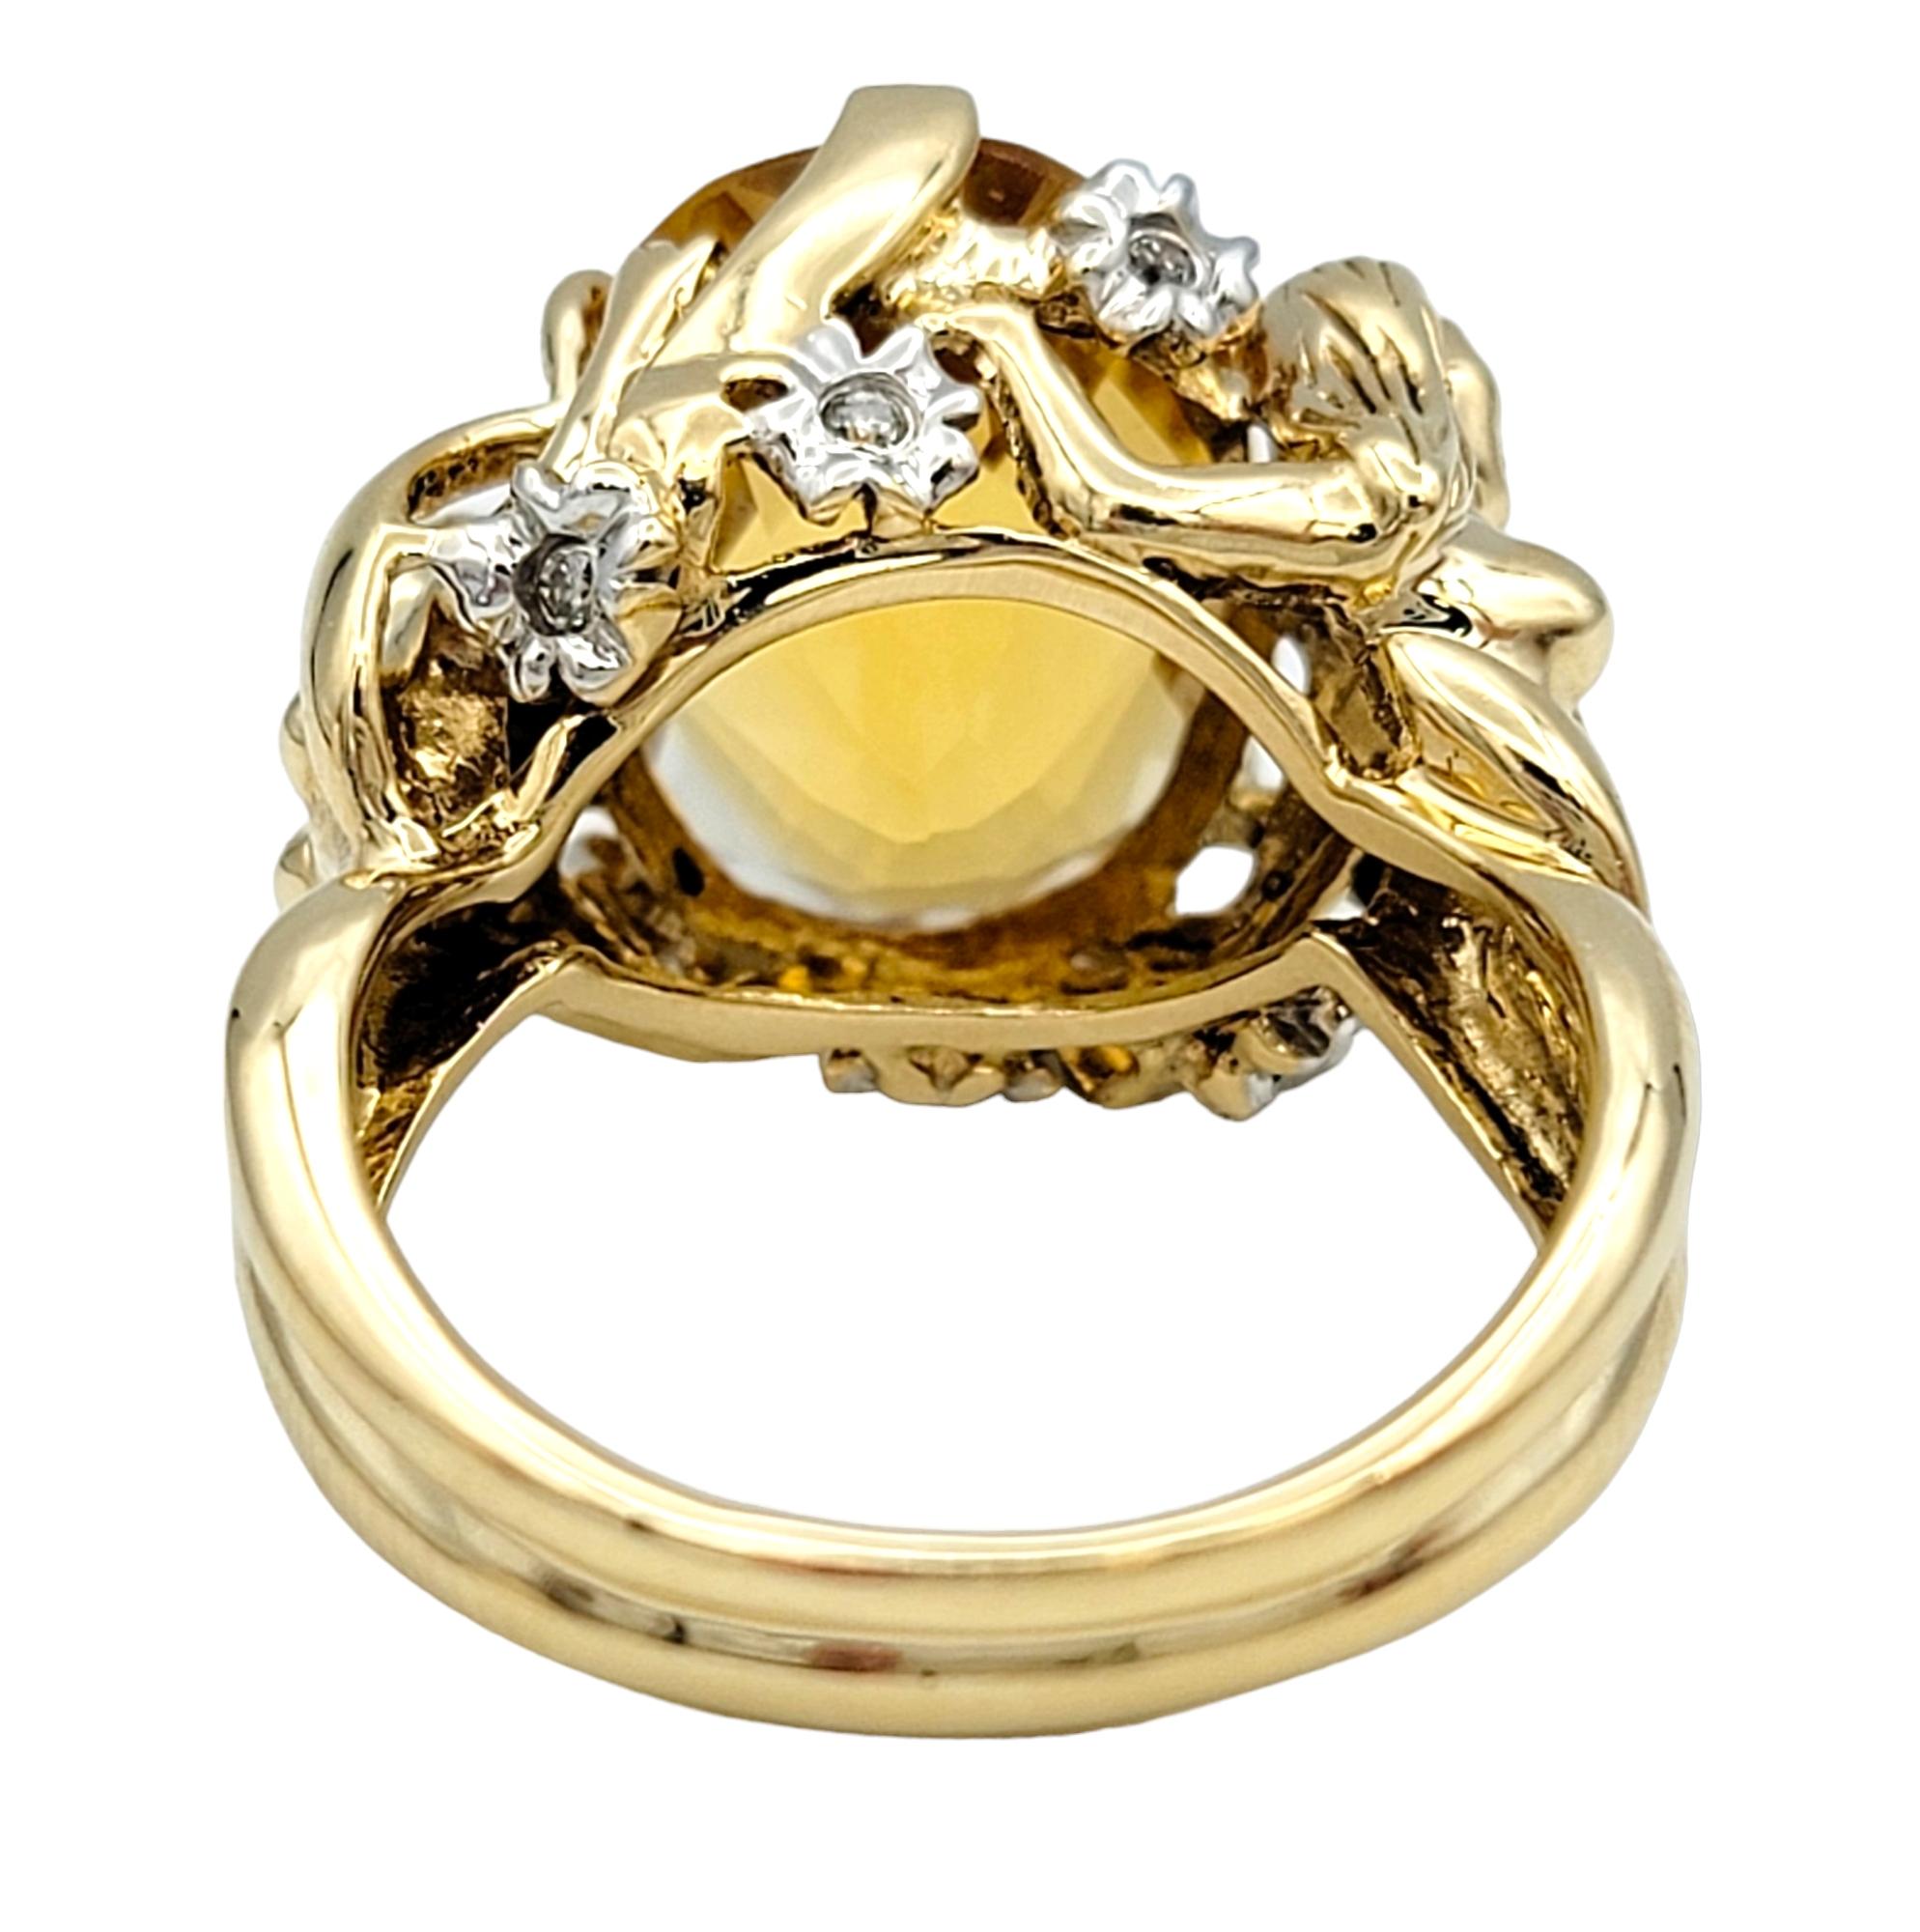 John C. Rinker Oval Citrine Cocktail Ring with Two Lady Carving in 14 Karat Gold In Good Condition For Sale In Scottsdale, AZ